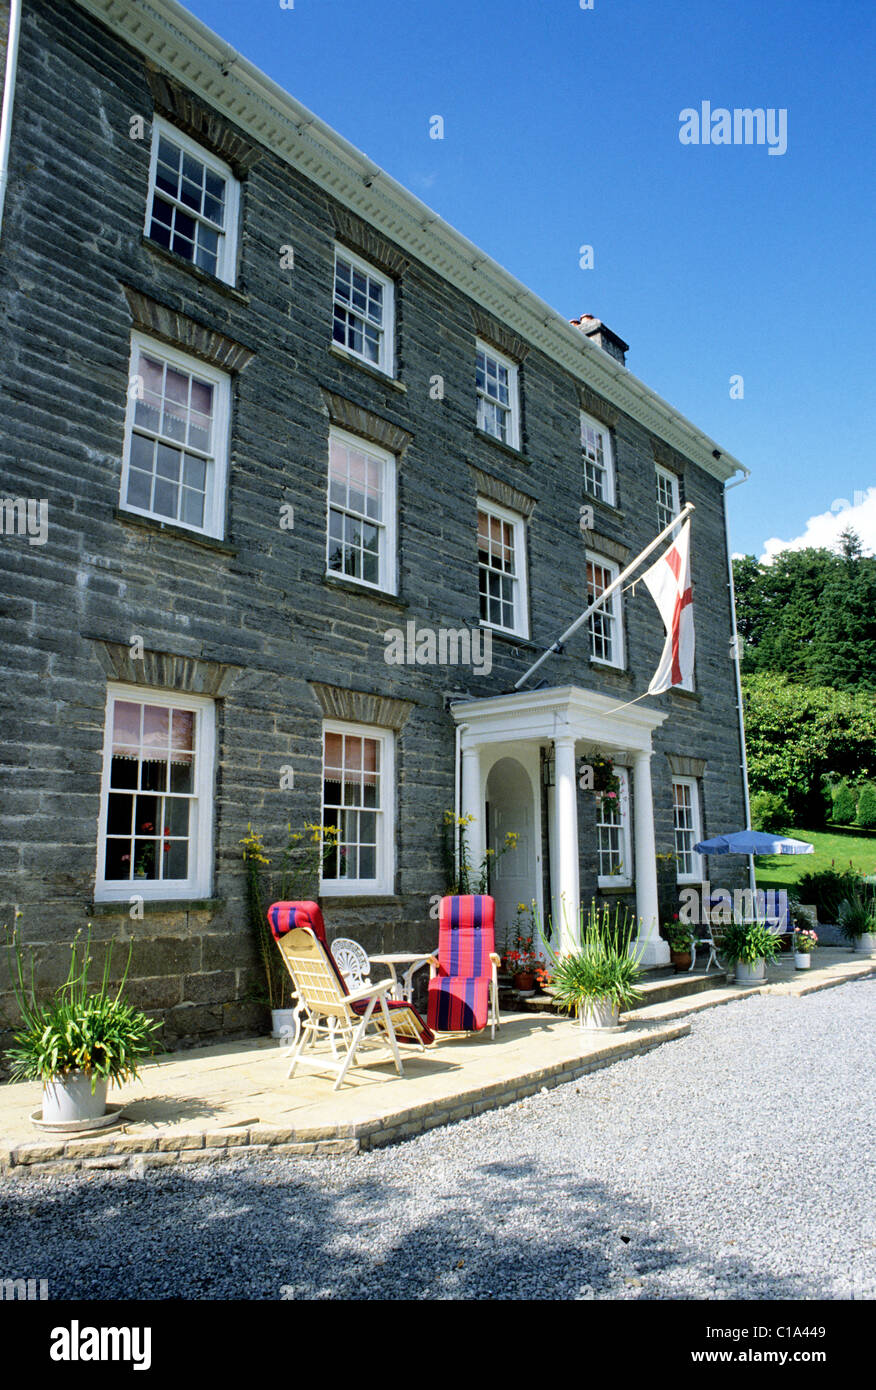 Lywn Derw Hotel, Abergwesyn, Powis Wales Welsh country hotels UK River Irfon Valley Stock Photo